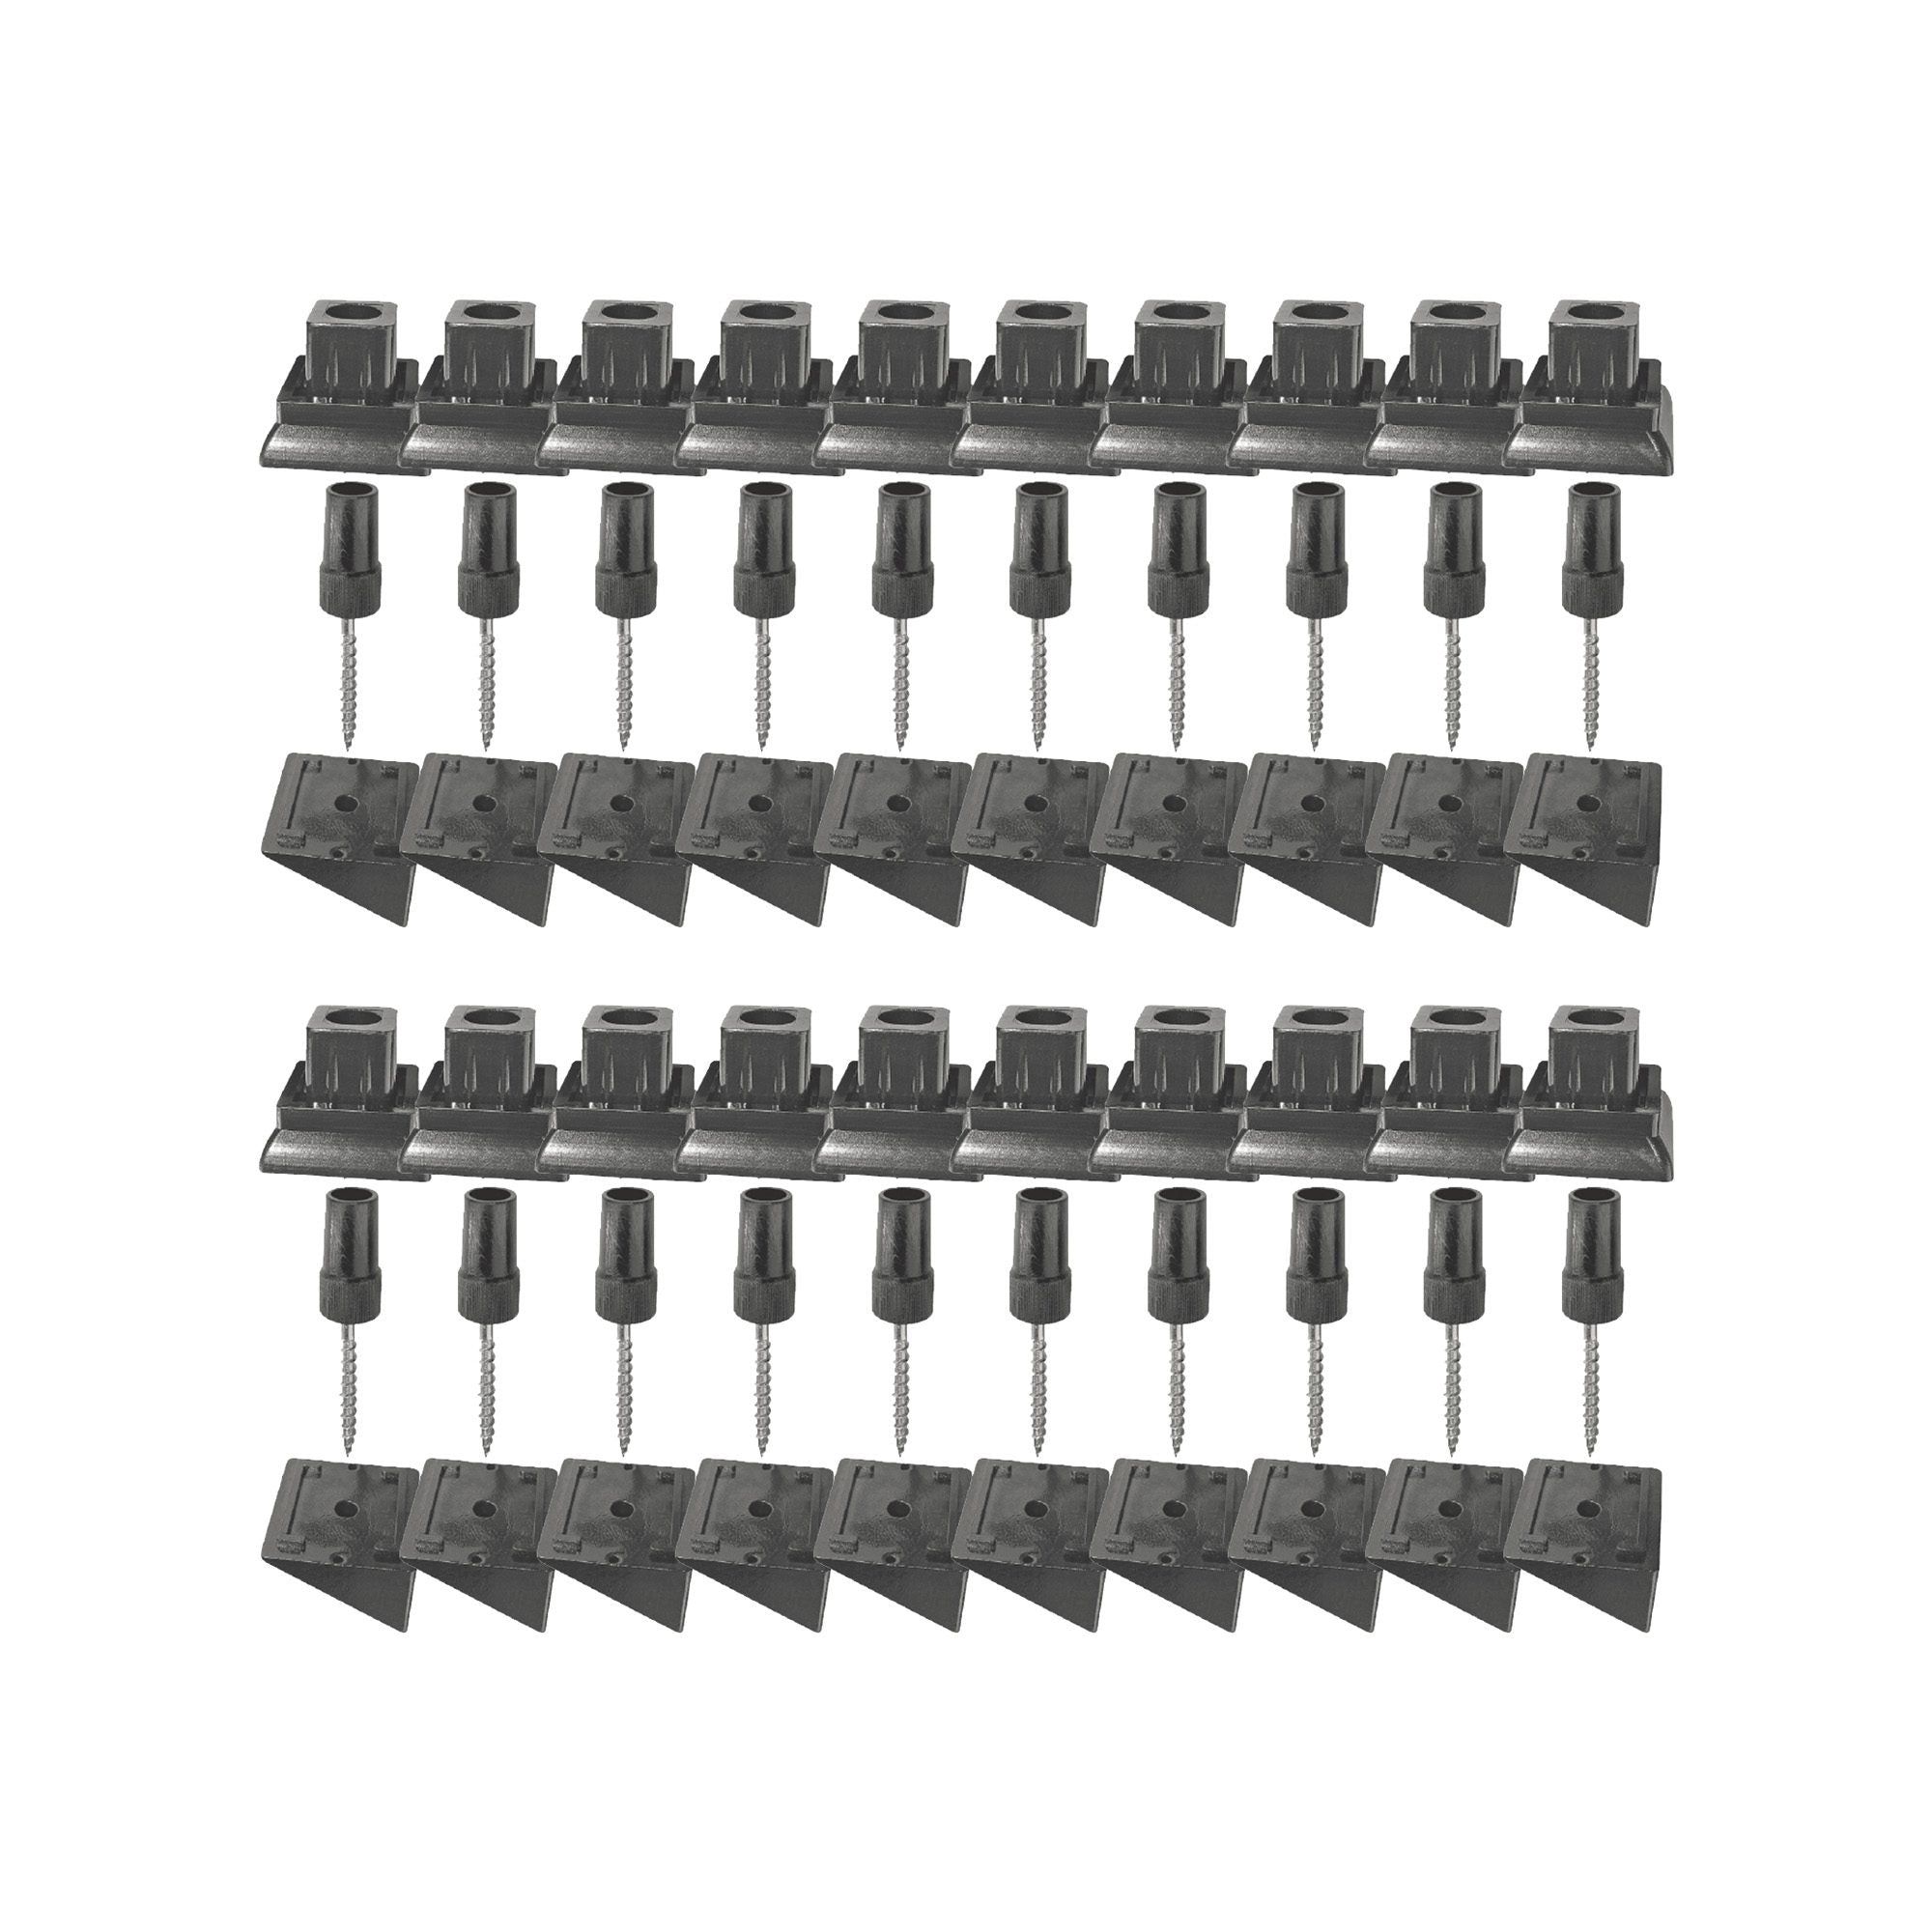 Surface Mount Square Stair Rail Connectors (20 Pack)